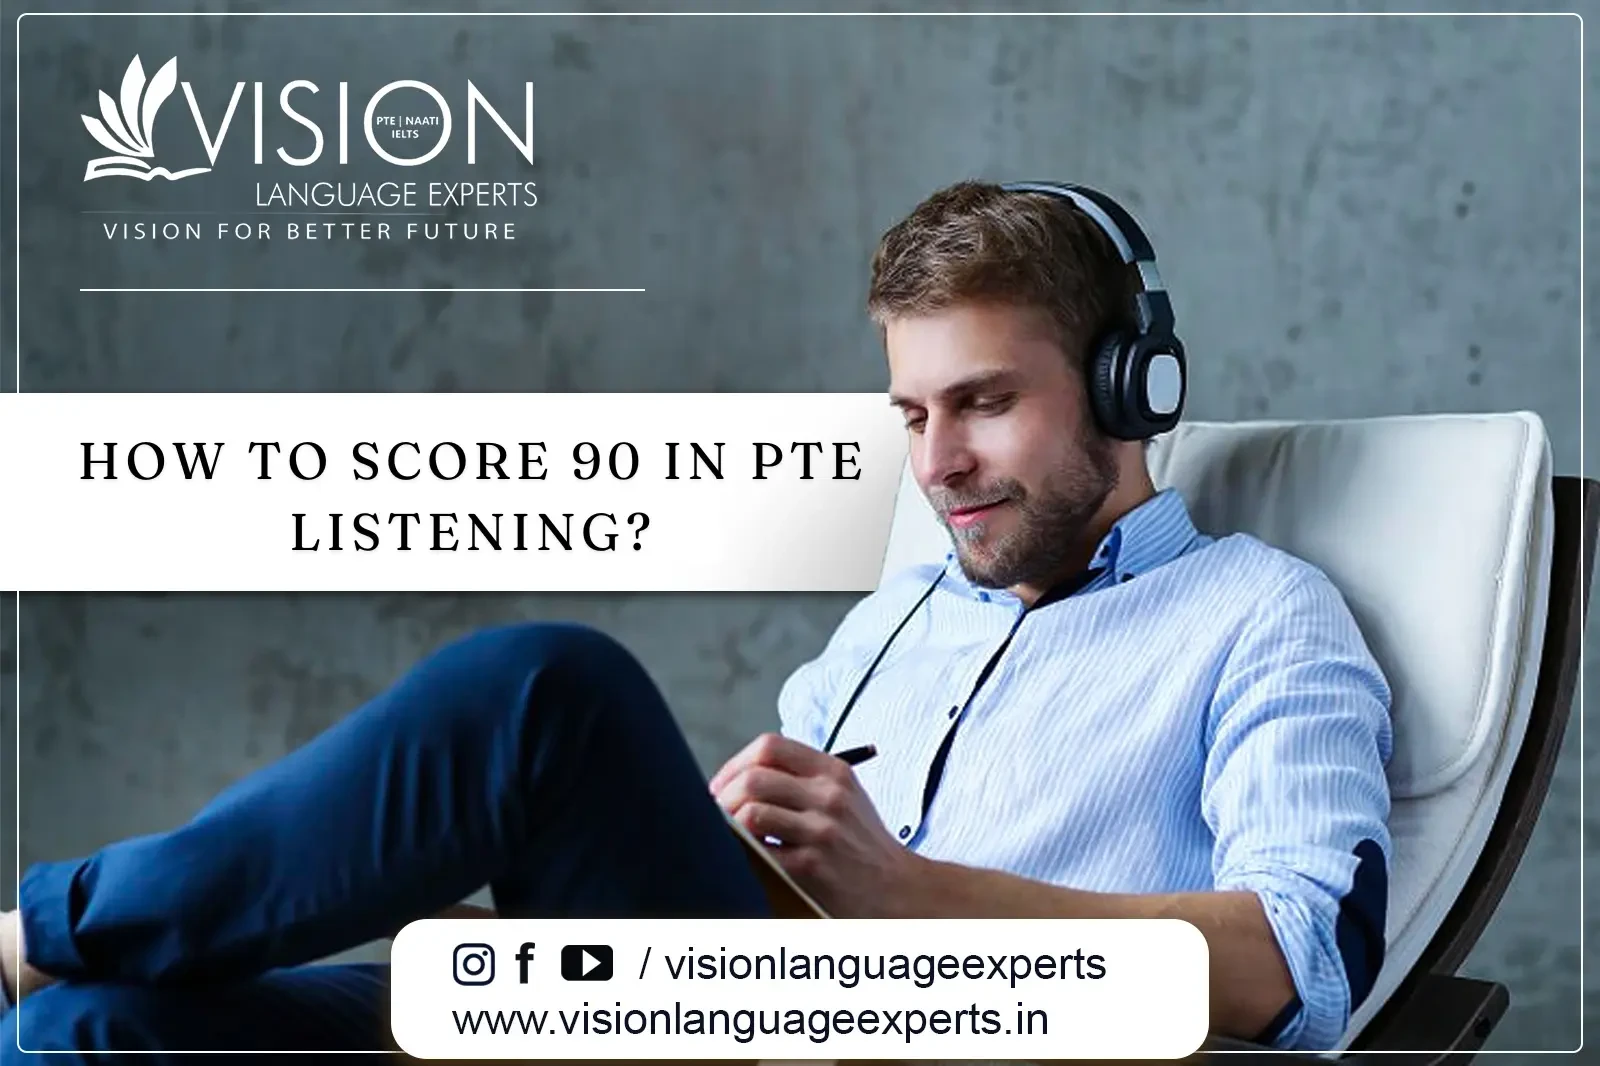 How to Score 90 in PTE Listening?